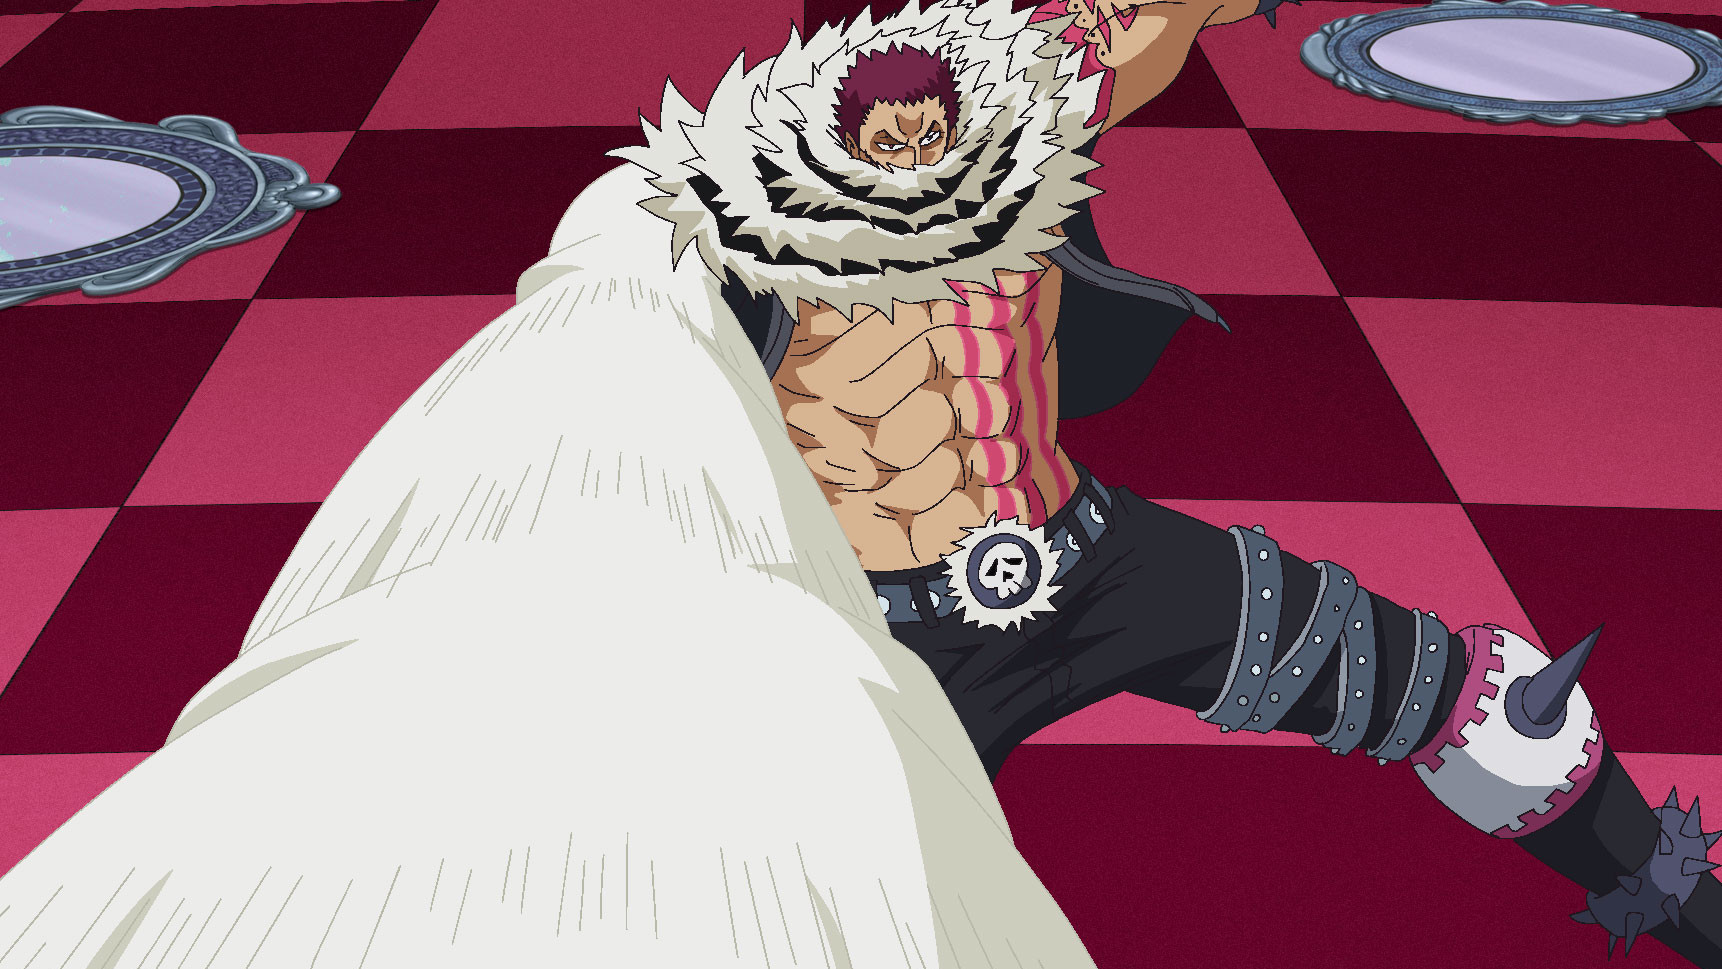 The End Of The Deadly Battle Katakuri S Awakening In Anger Watch On Funimation